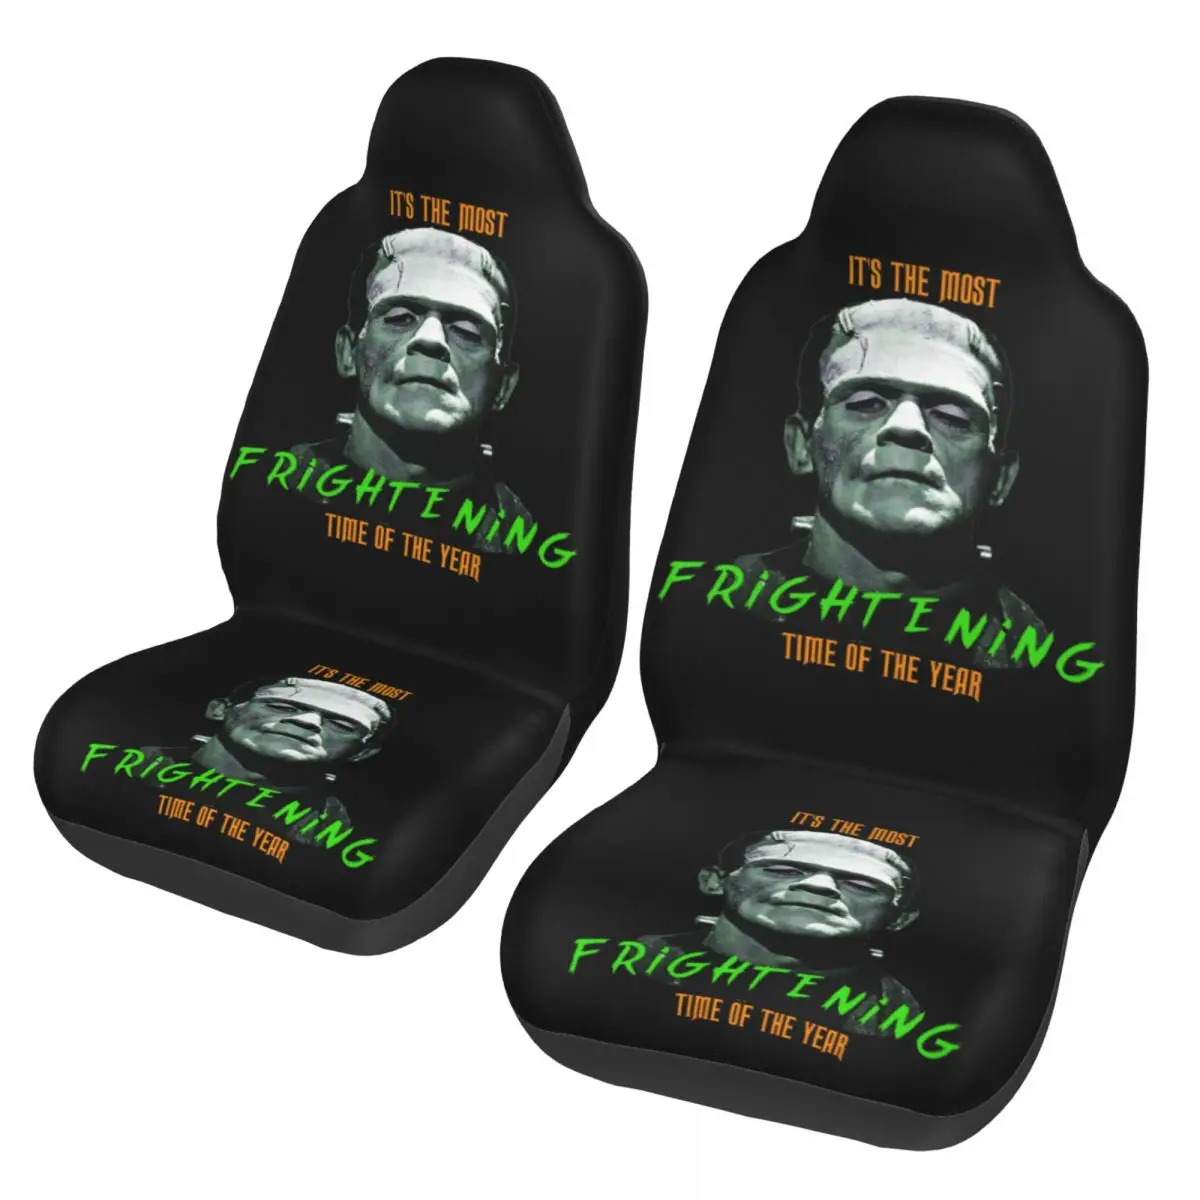 Frightening Frankenstein Universal Auto Car Seat Covers Fit Any Truck Van RV Scary Horror Film Bucket Seat Protector Cover 2 PCS